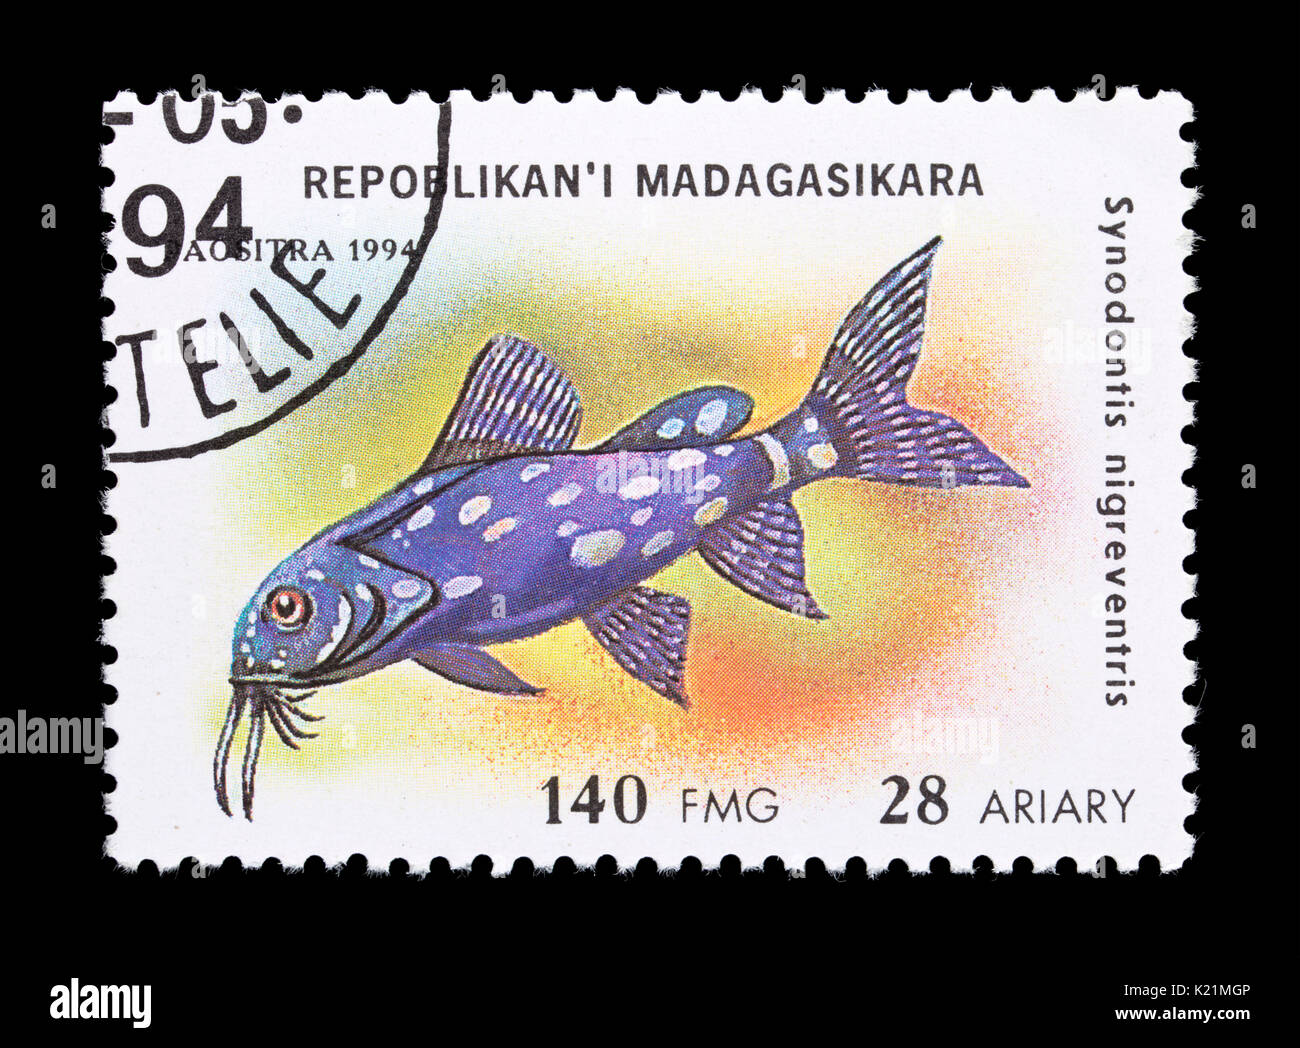 Postage stamp from Madagascar depicting  blotched upside-down catfish (Synodontis nigriventris) Stock Photo